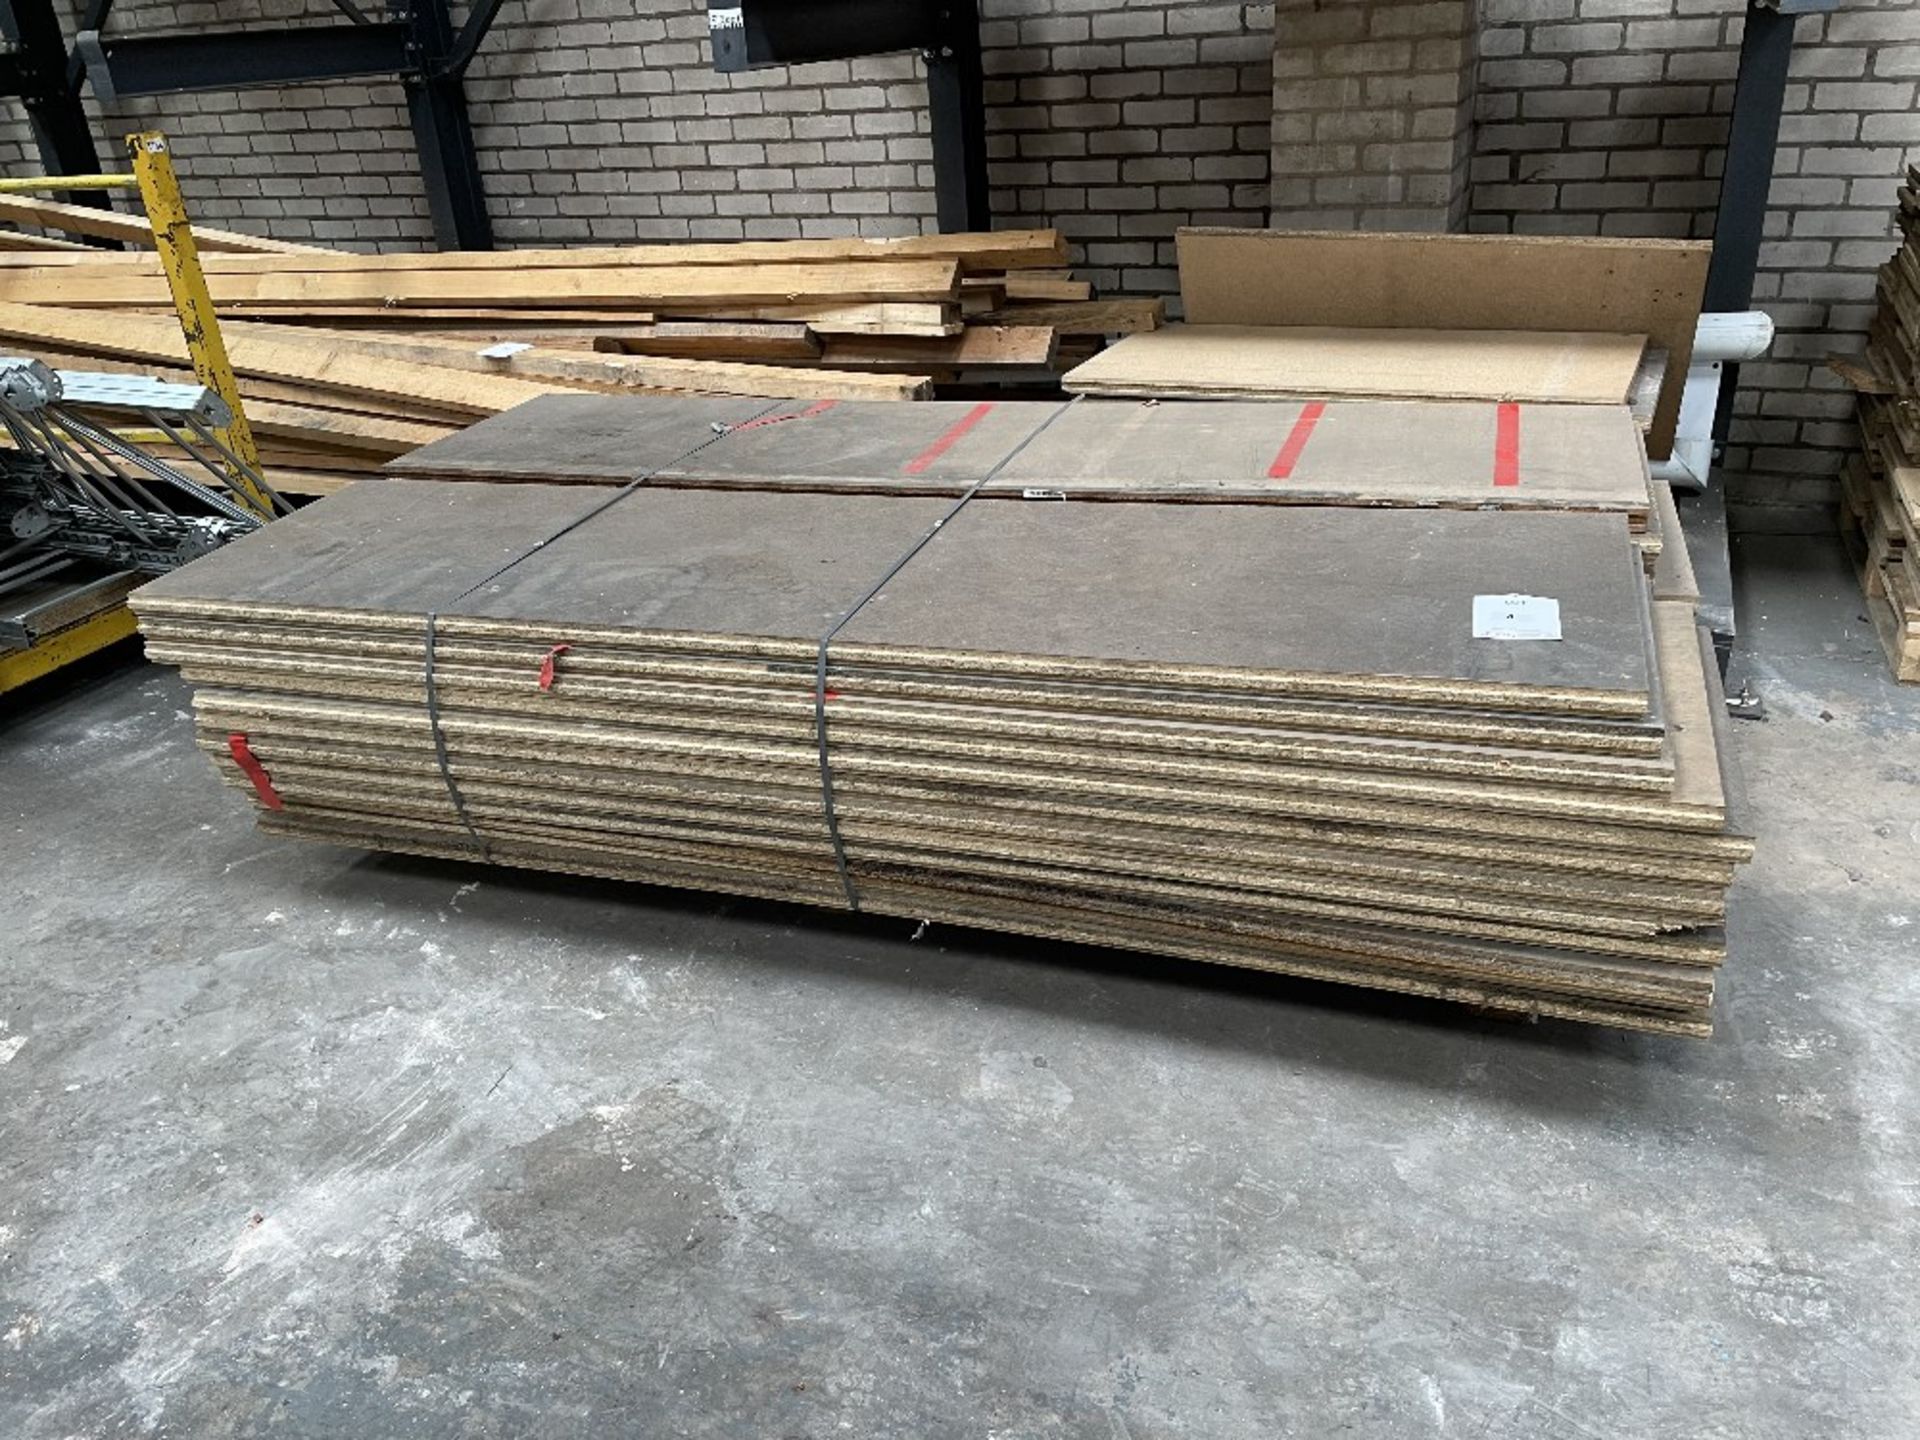 24 x Heavy Duty Tongue & Groove Chipboard Floorboards | 240cm x 60cm x 4cm - Image 2 of 5